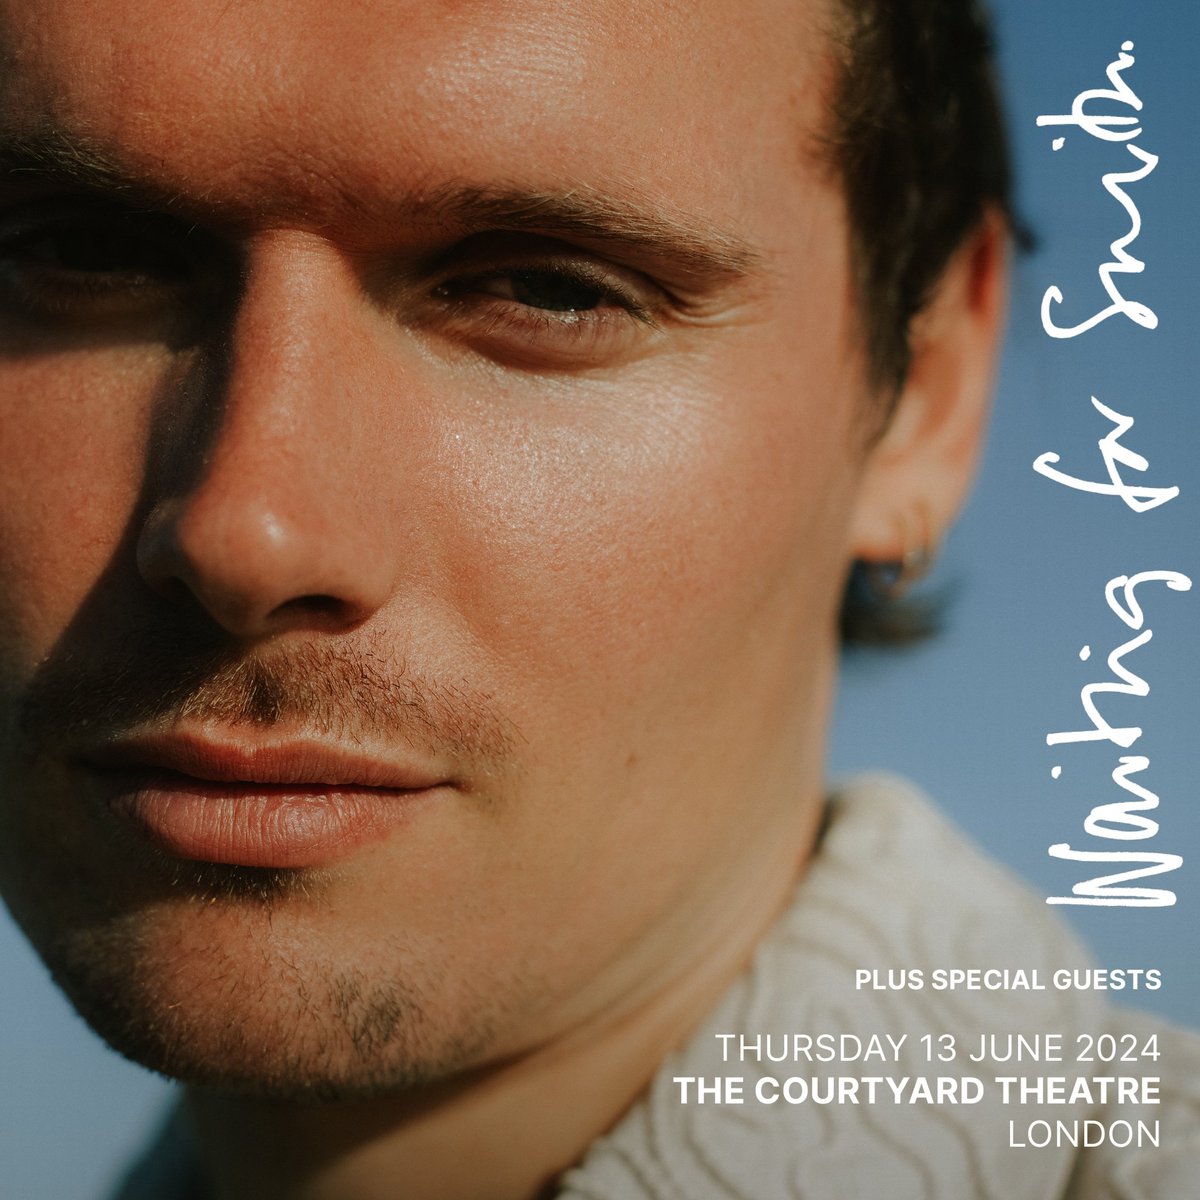 #ONSALENOW @WaitingForSmith is bringing his show at The Courtyard Theatre in London on Thursday, June 13th! 💐 Grab your tickets now! 🎟️ dice.fm/event/6627a886…